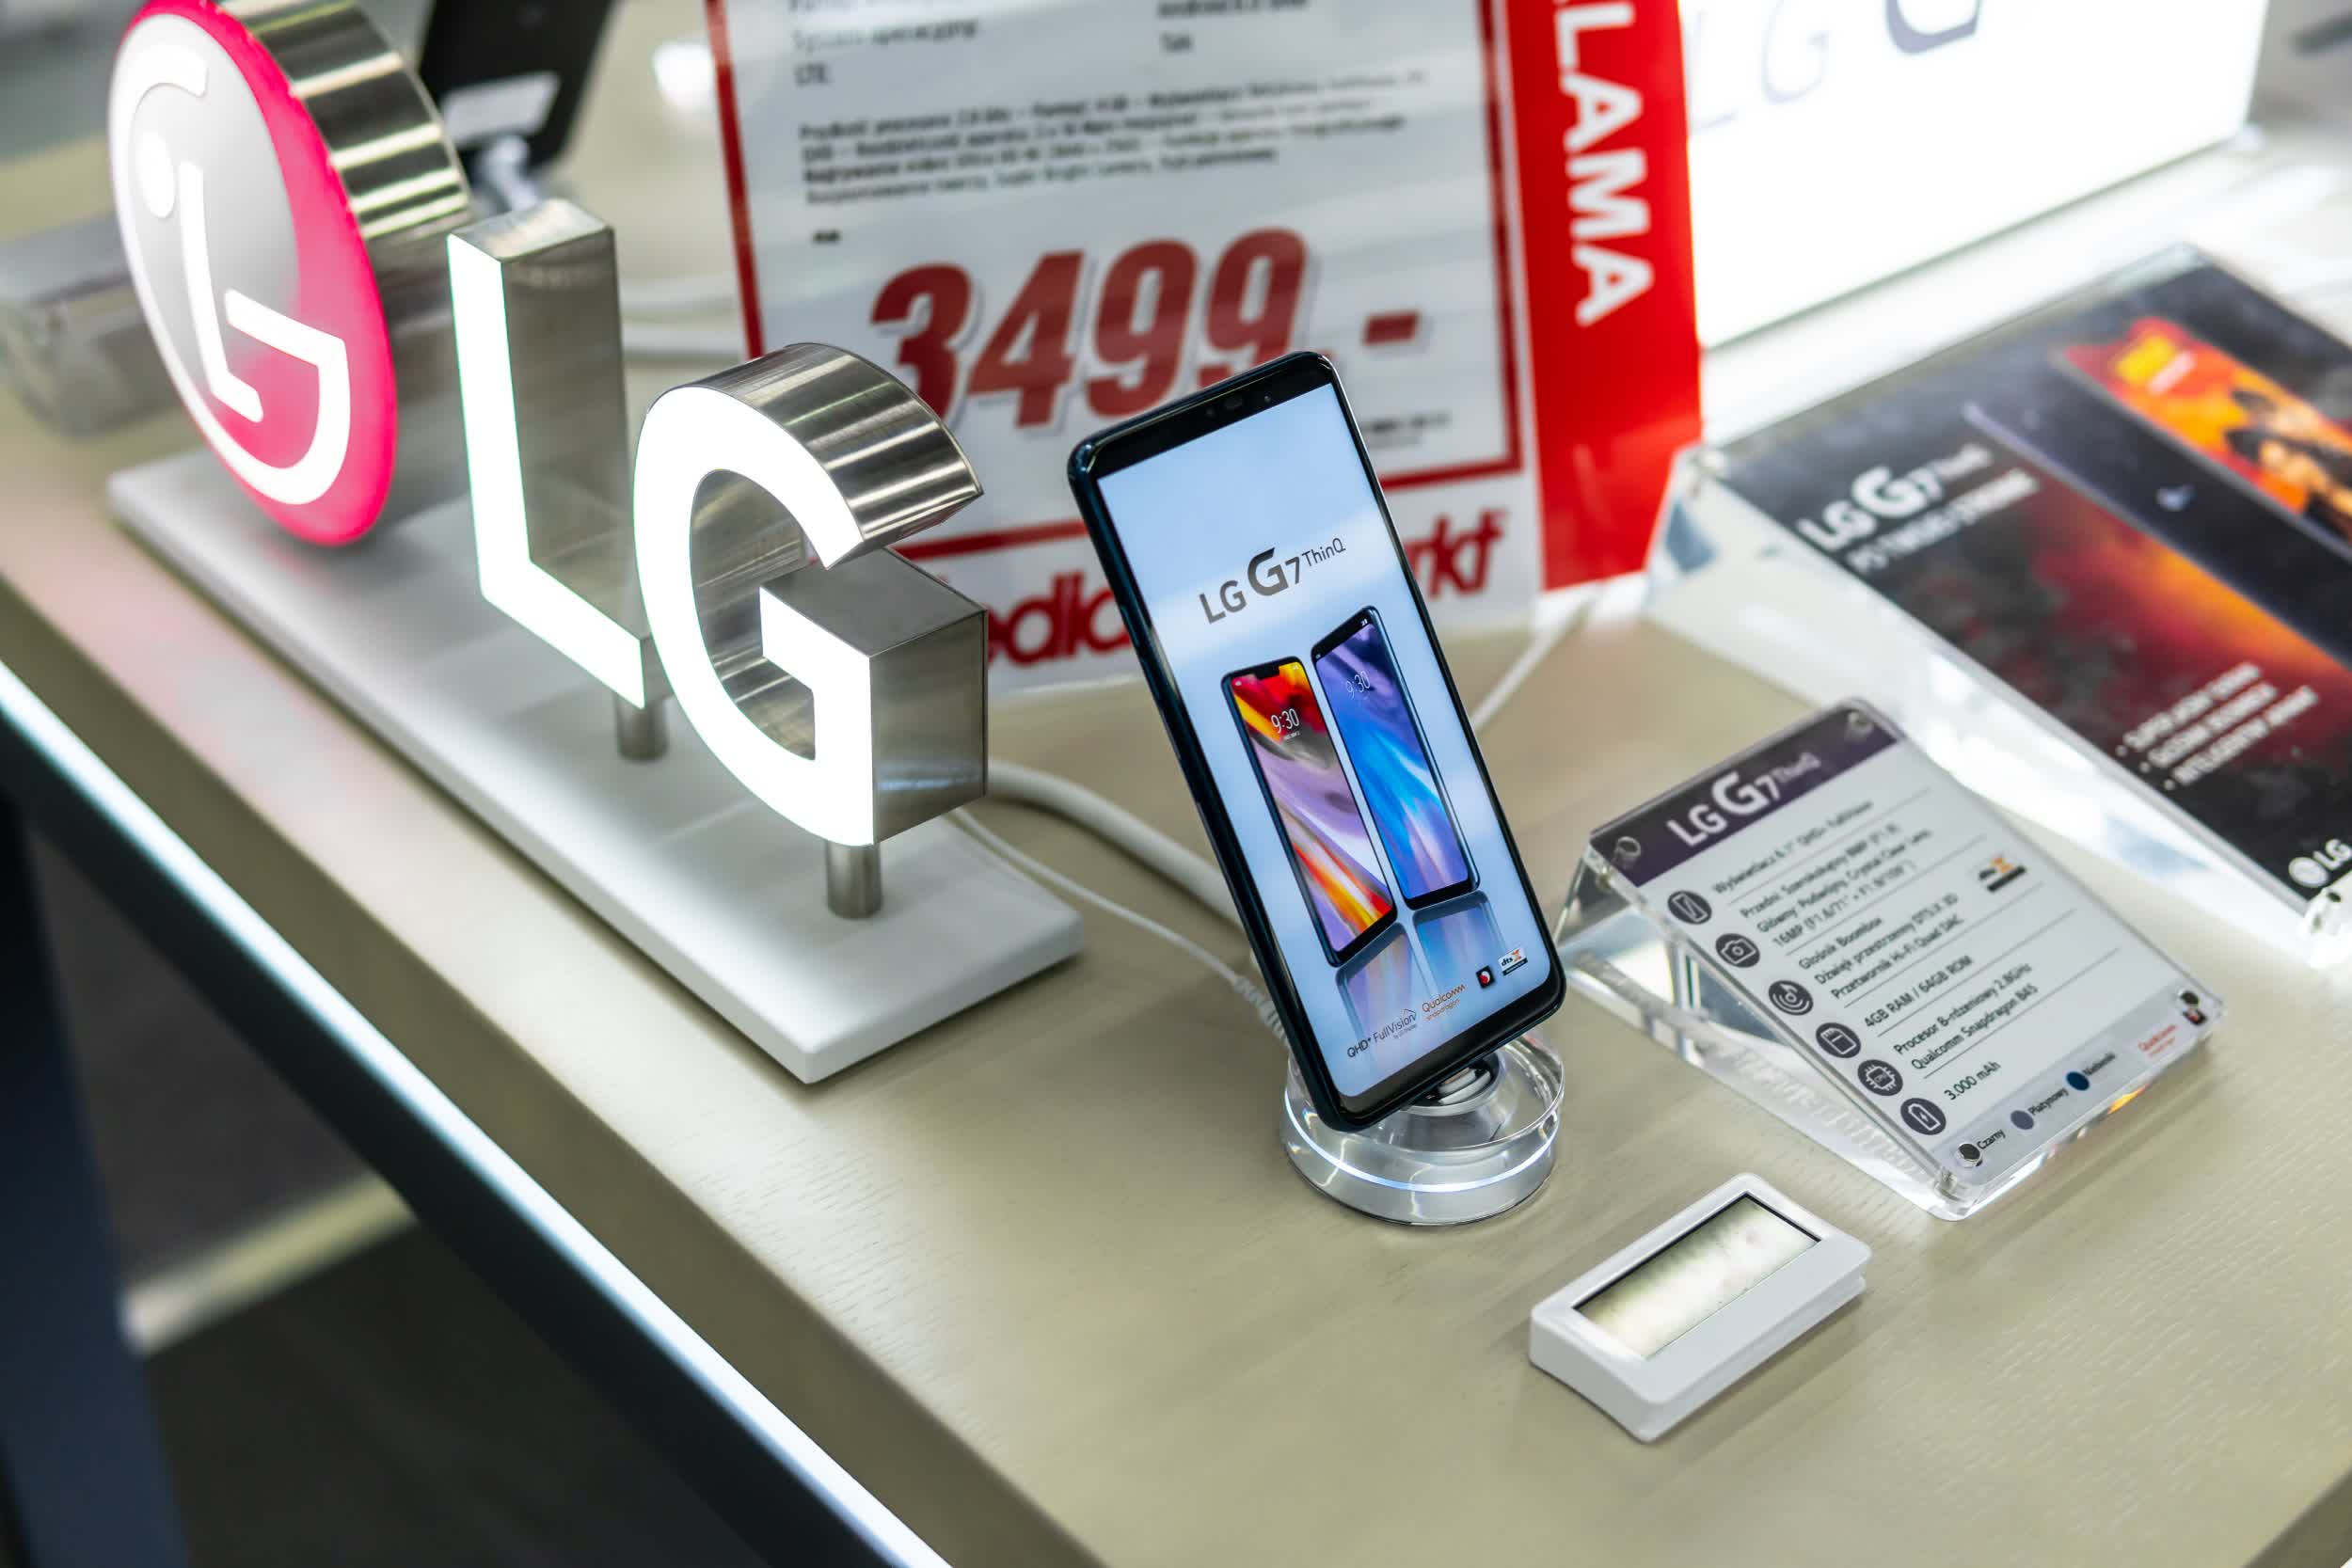 LG's last-ever phone has rolled off the production line